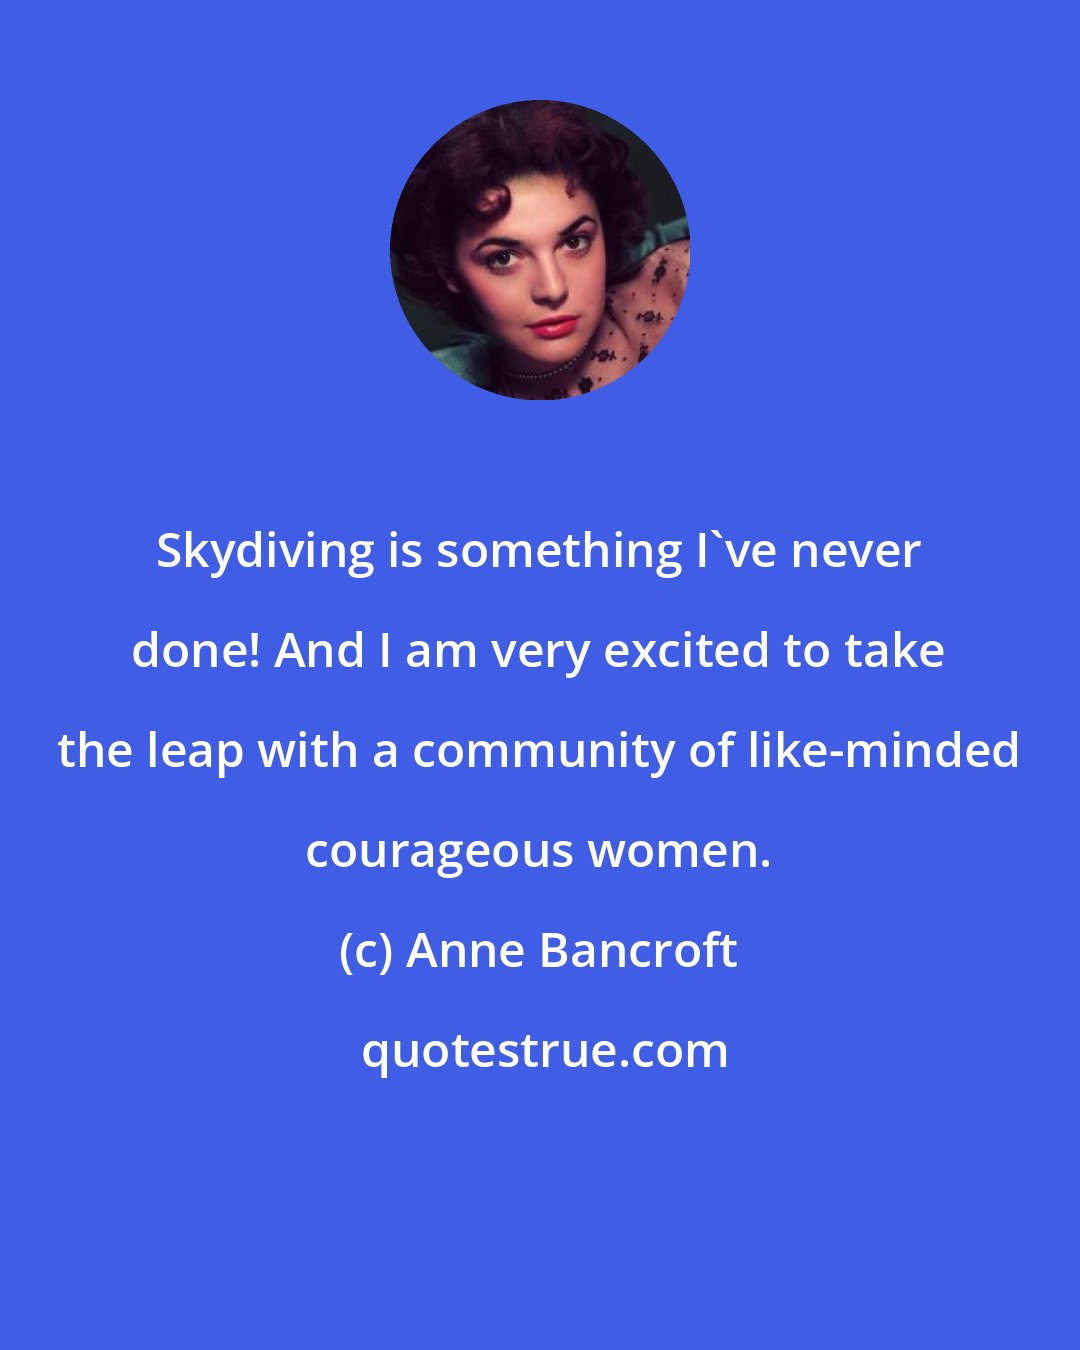 Anne Bancroft: Skydiving is something I've never done! And I am very excited to take the leap with a community of like-minded courageous women.